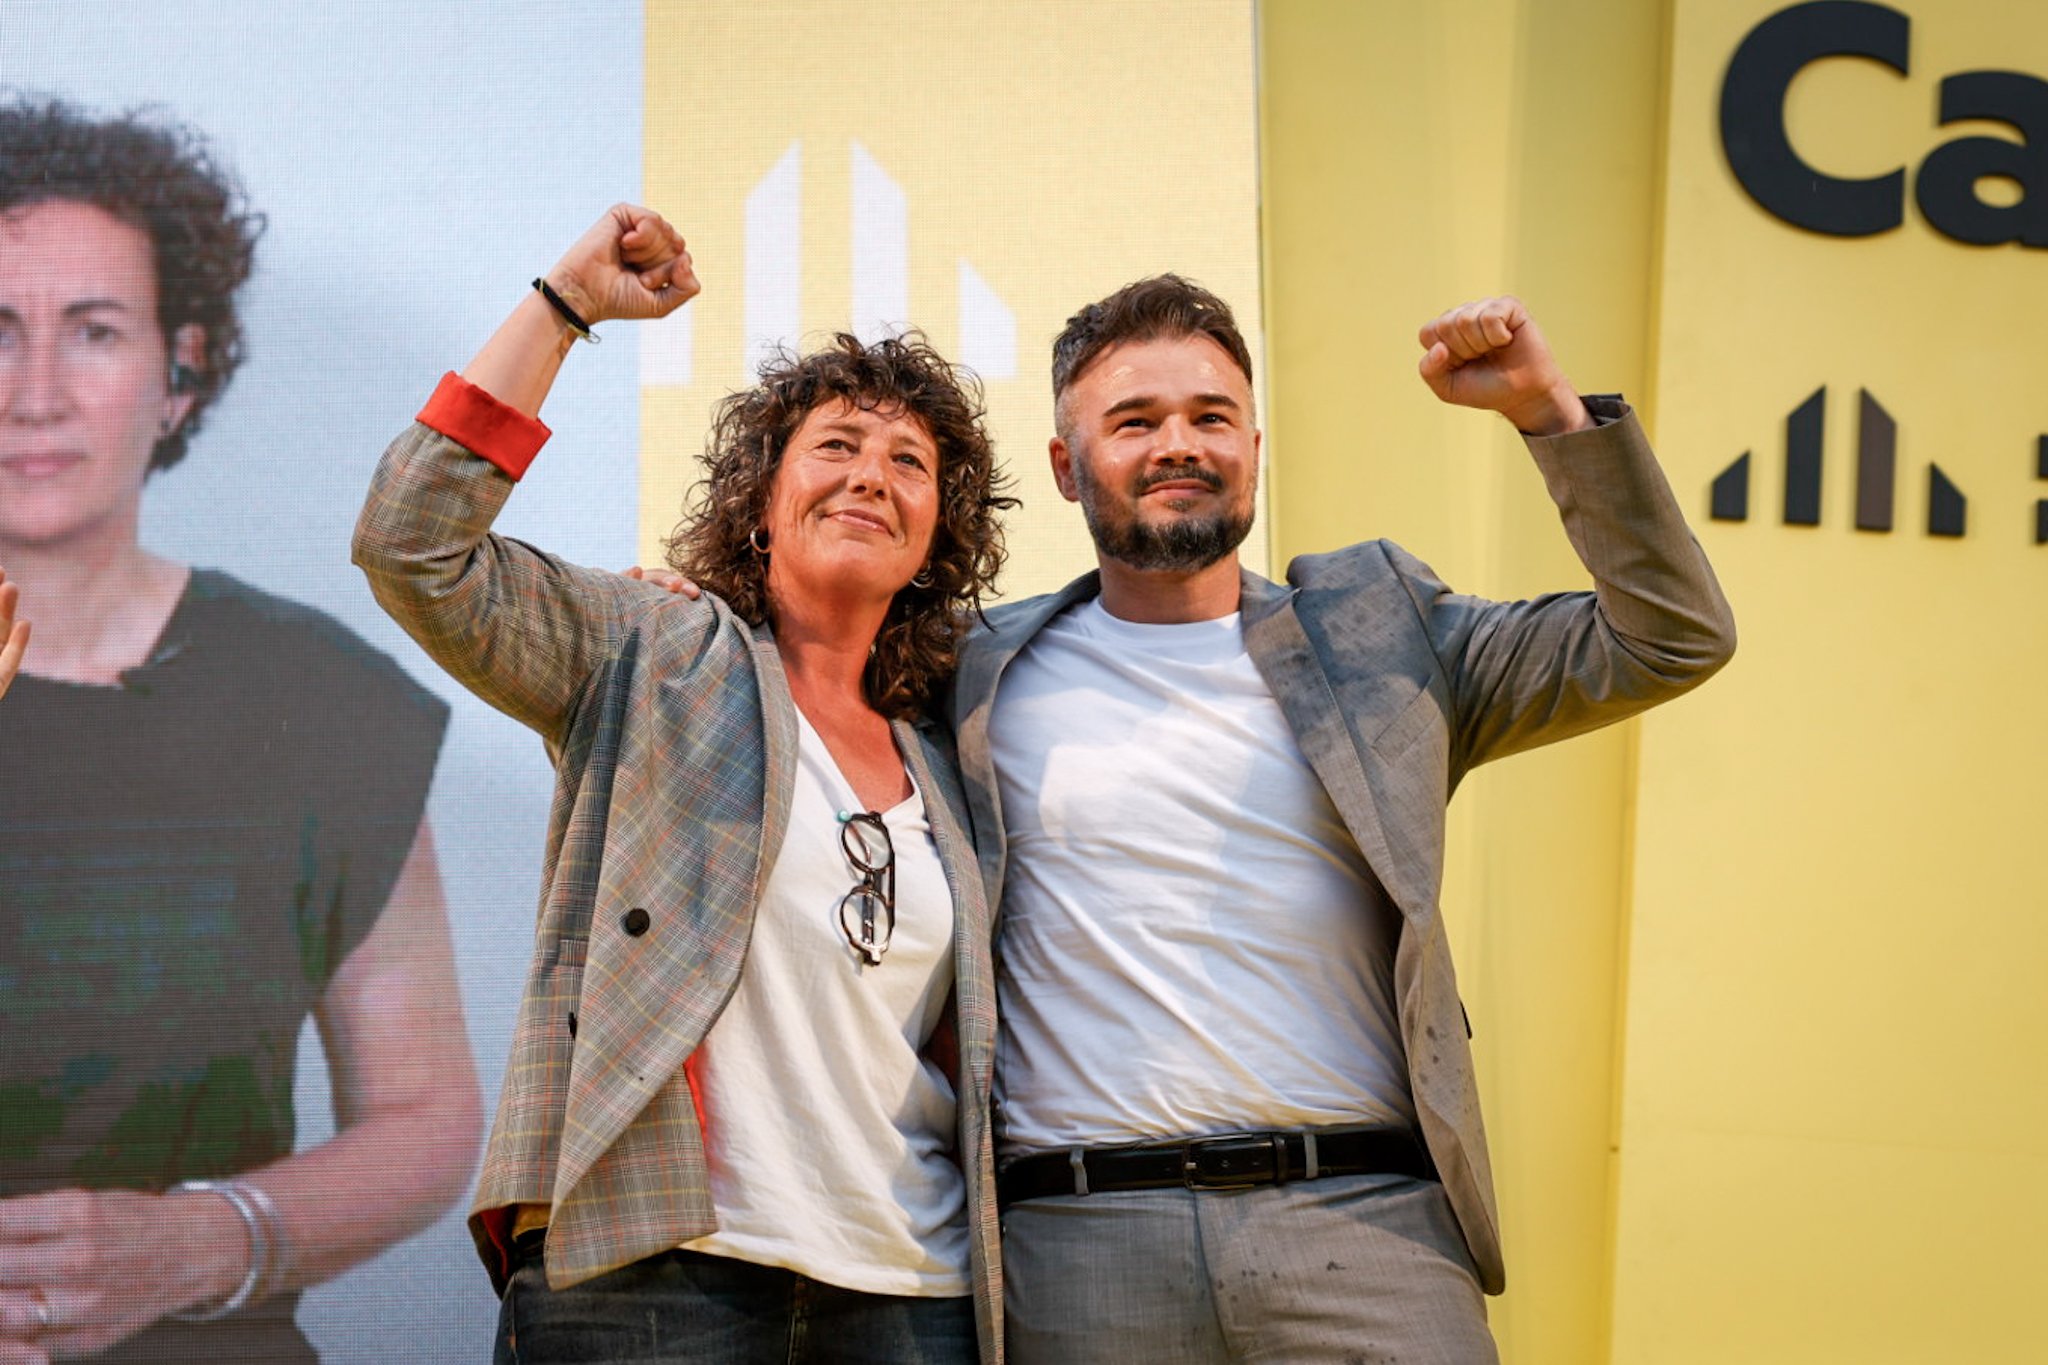 July 23rd will be "a date with history" and ERC, a "useful vote against the right", says Rufián